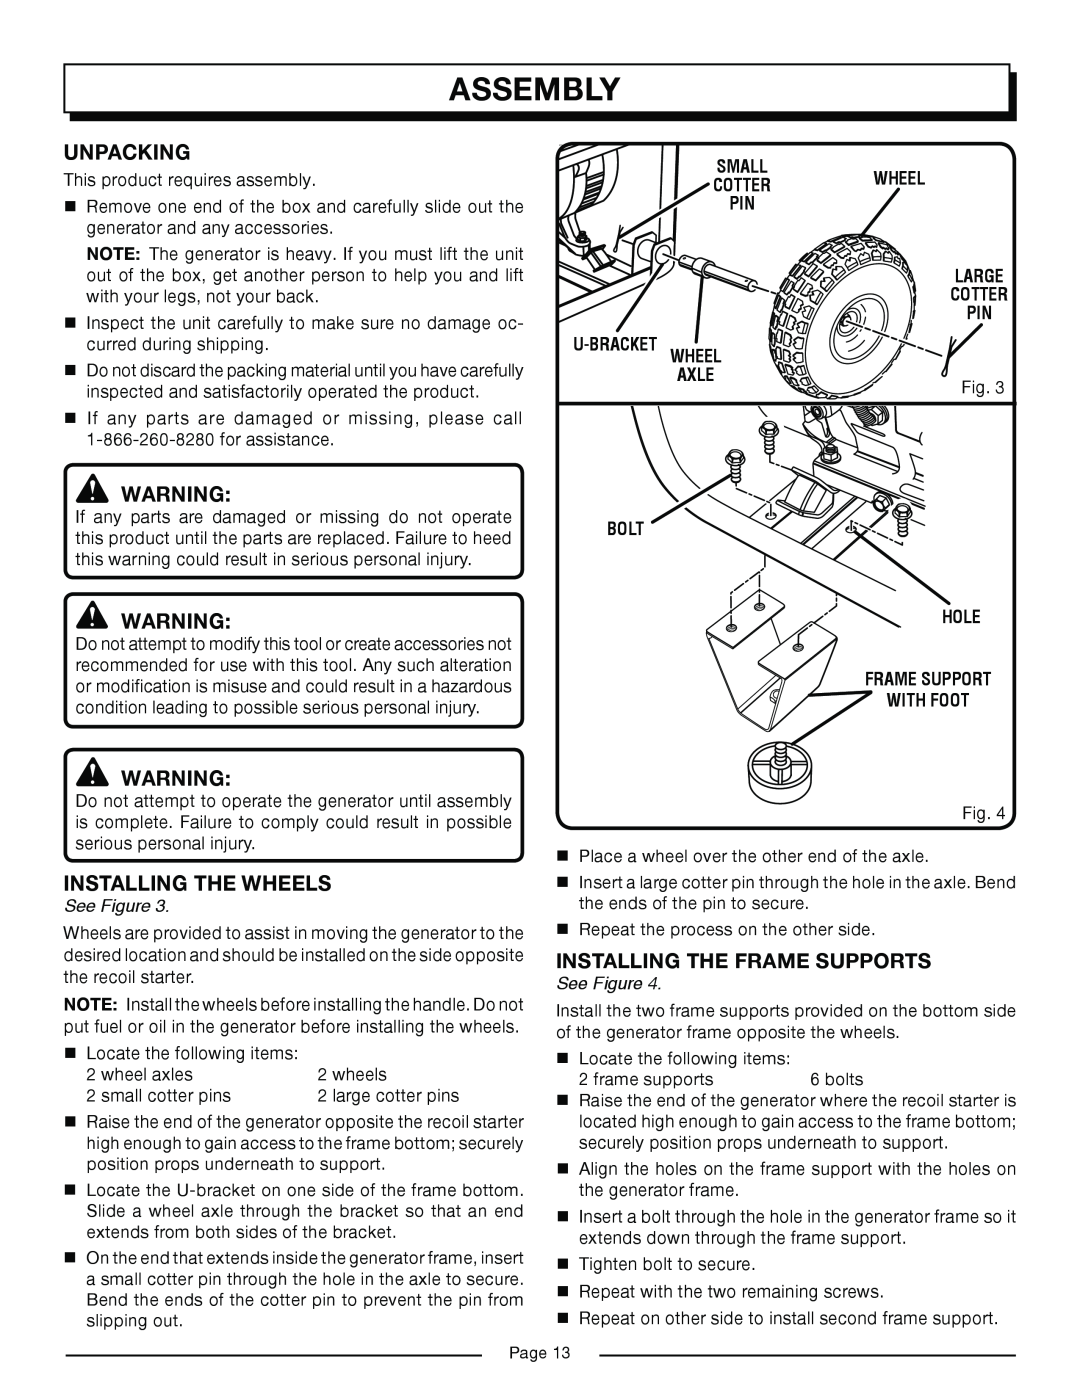 Homelite HG6000 manual Assembly, Unpacking, Installing The Wheels, Installing The Frame Supports, See Figure 